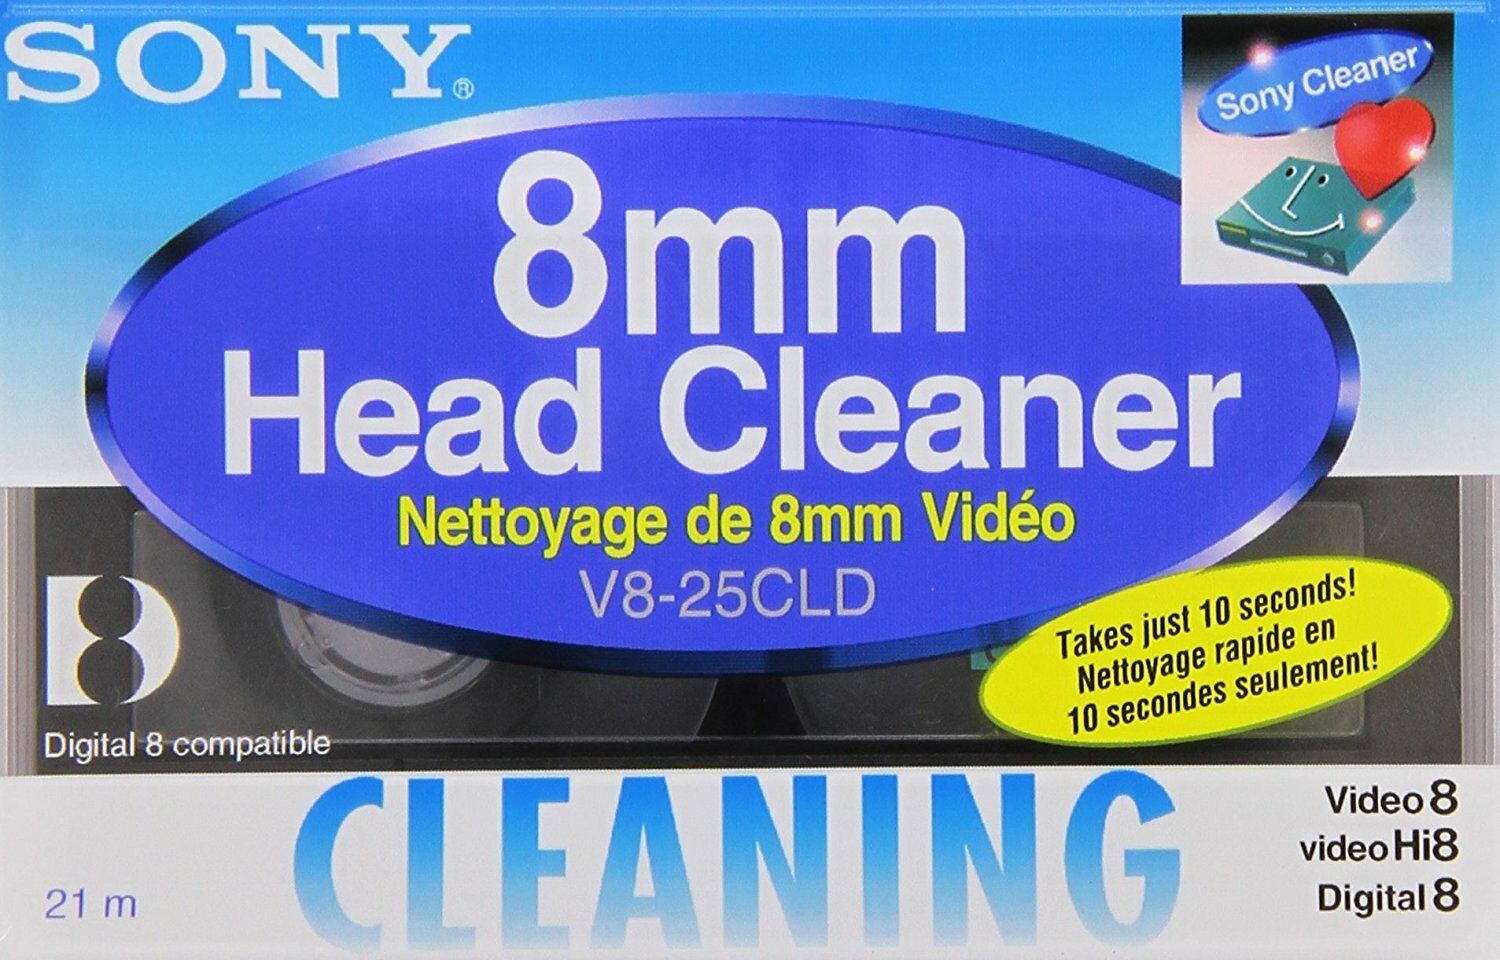 Sony V8-25cld 8mm Video Head Cleaning Cassette For Video 8, Video Hi8, Digital 8